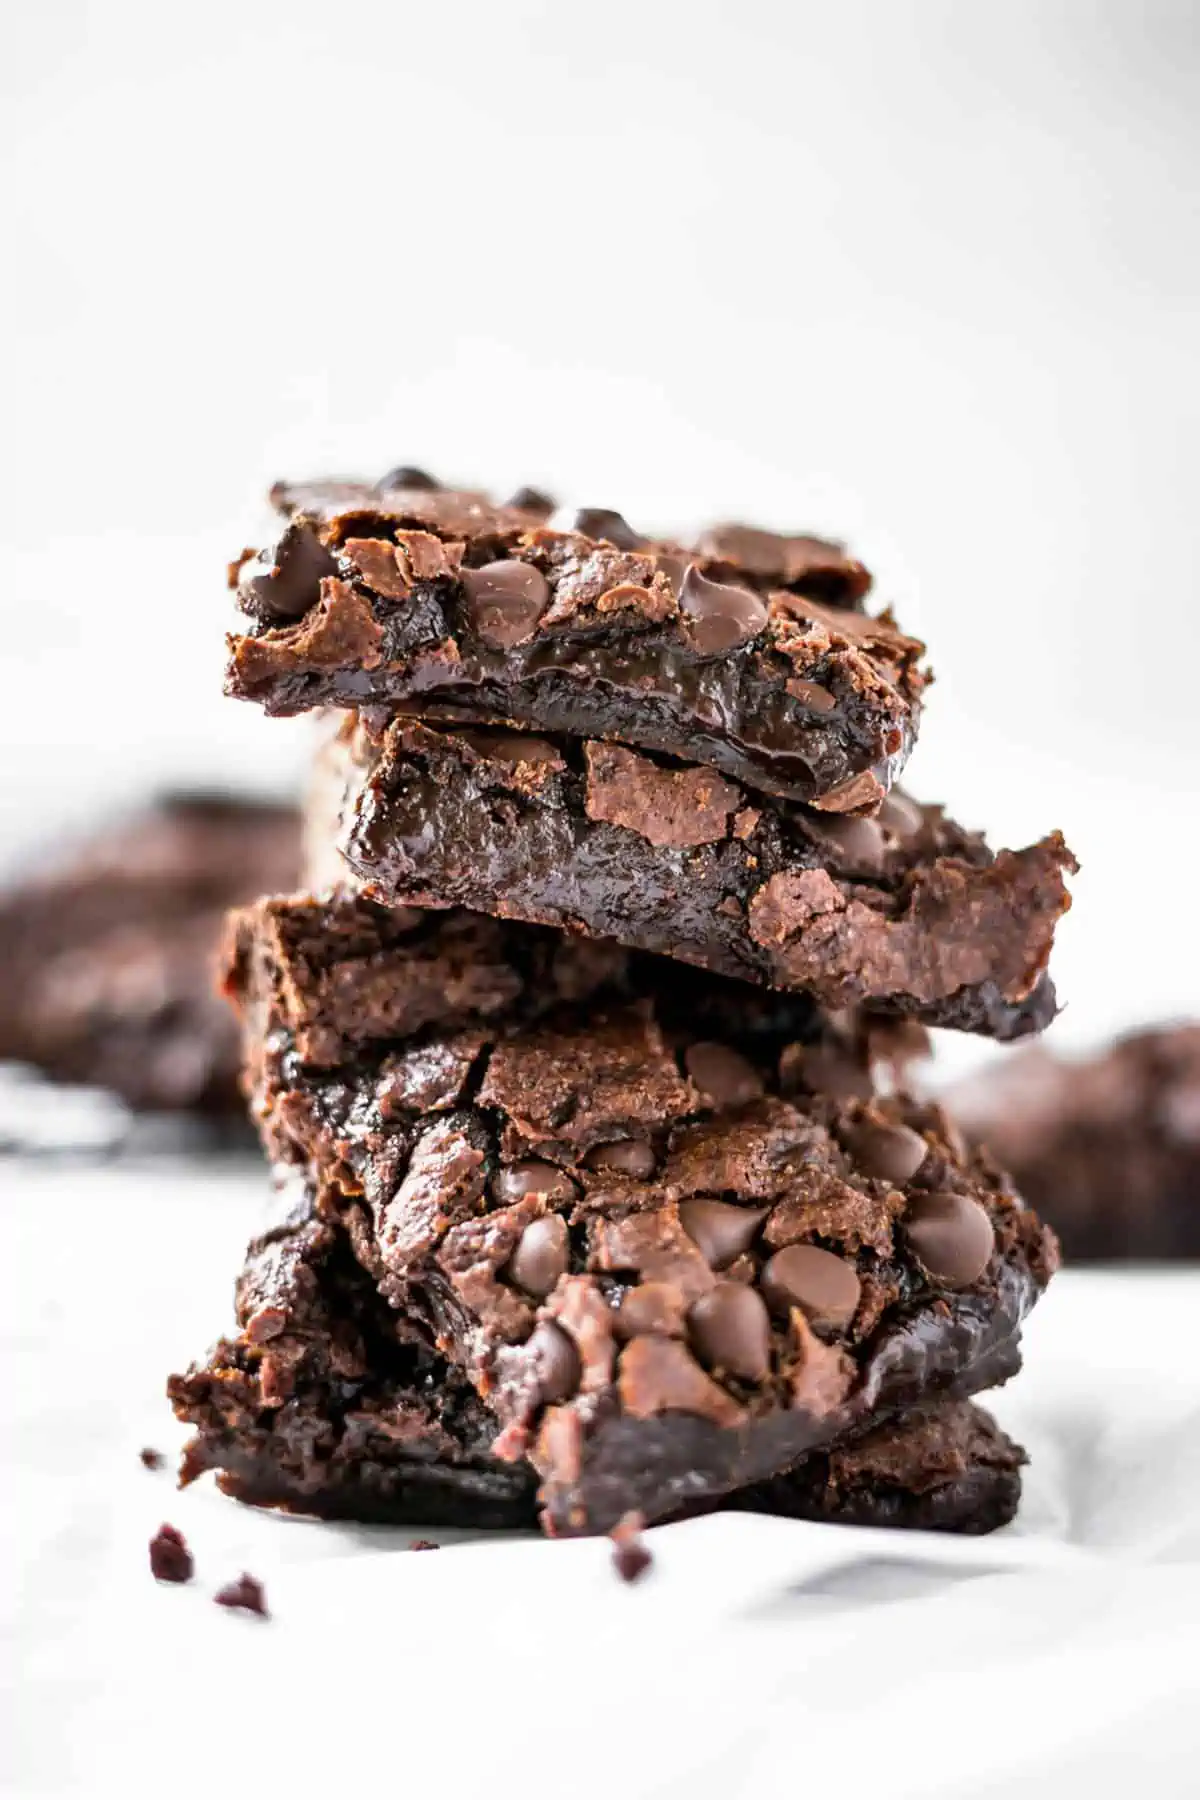 Four squares of vegan brownies stacked with chocolate chips sprinkled around.